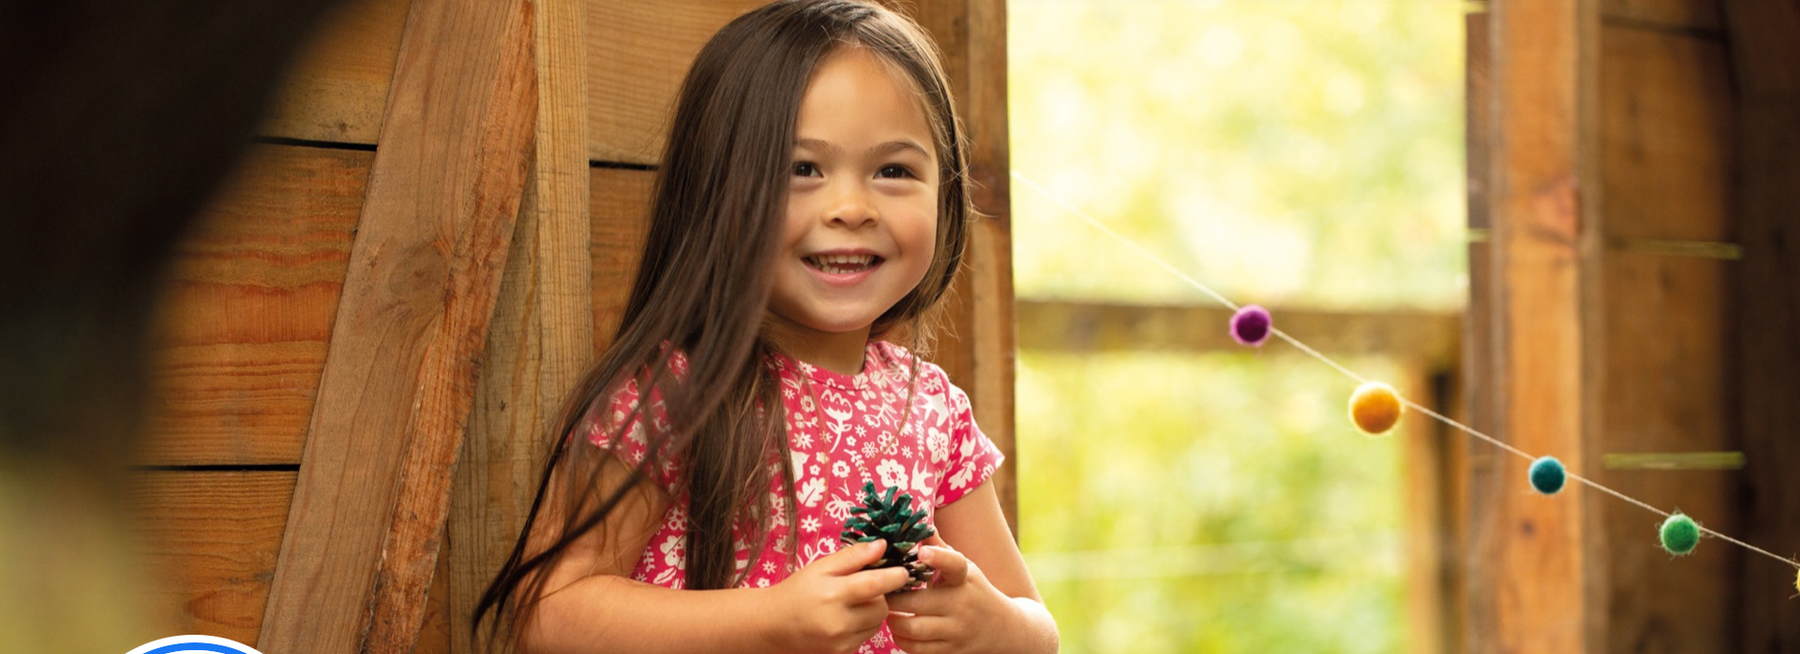 What makes Frugi clothing so special?